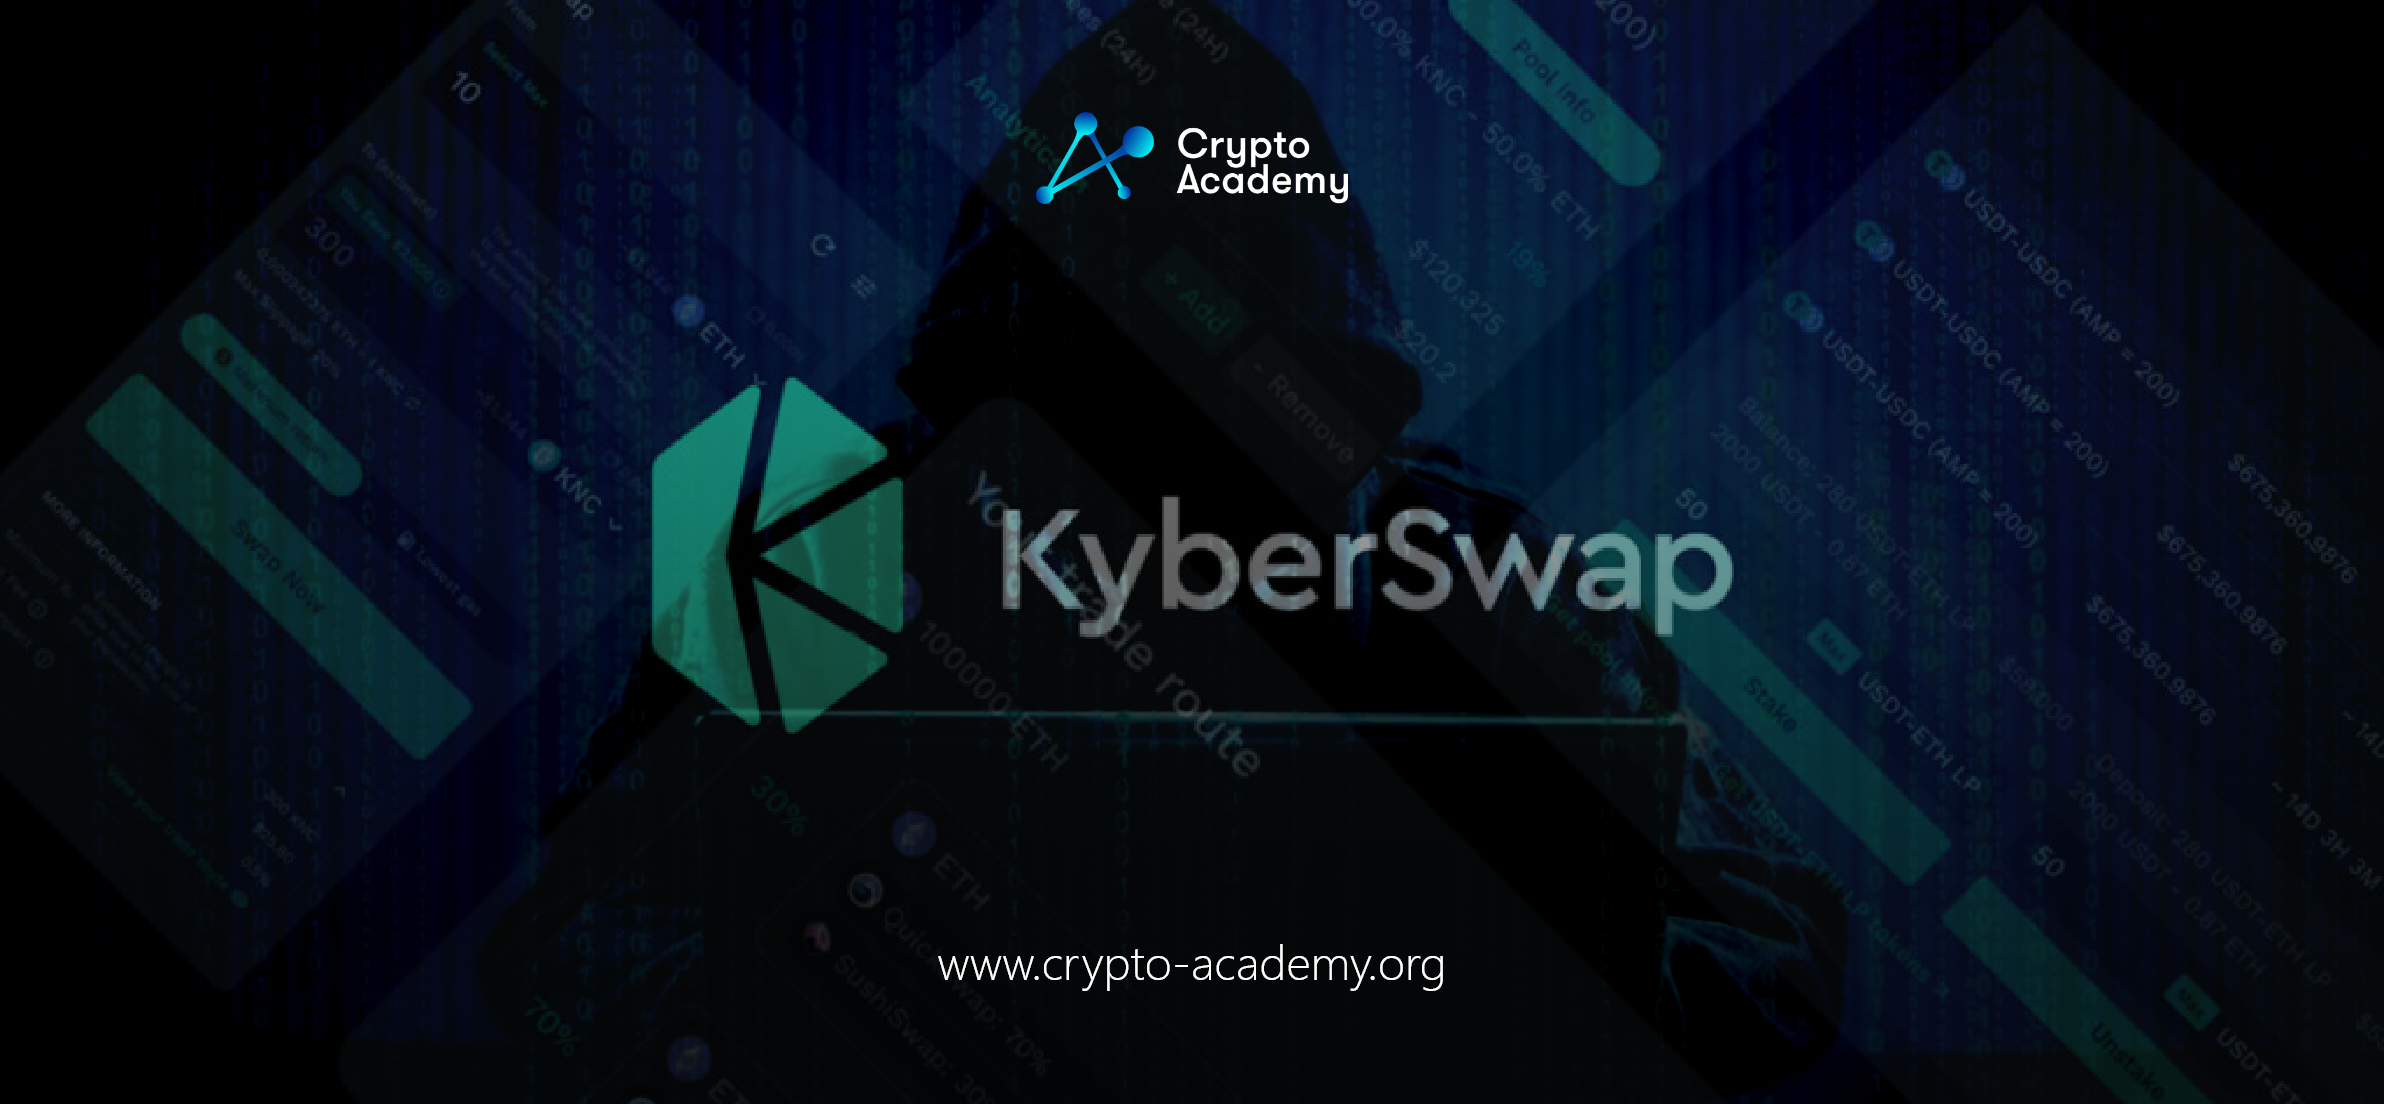 KyberSwap Attacker Moves $2.5M to Ethereum